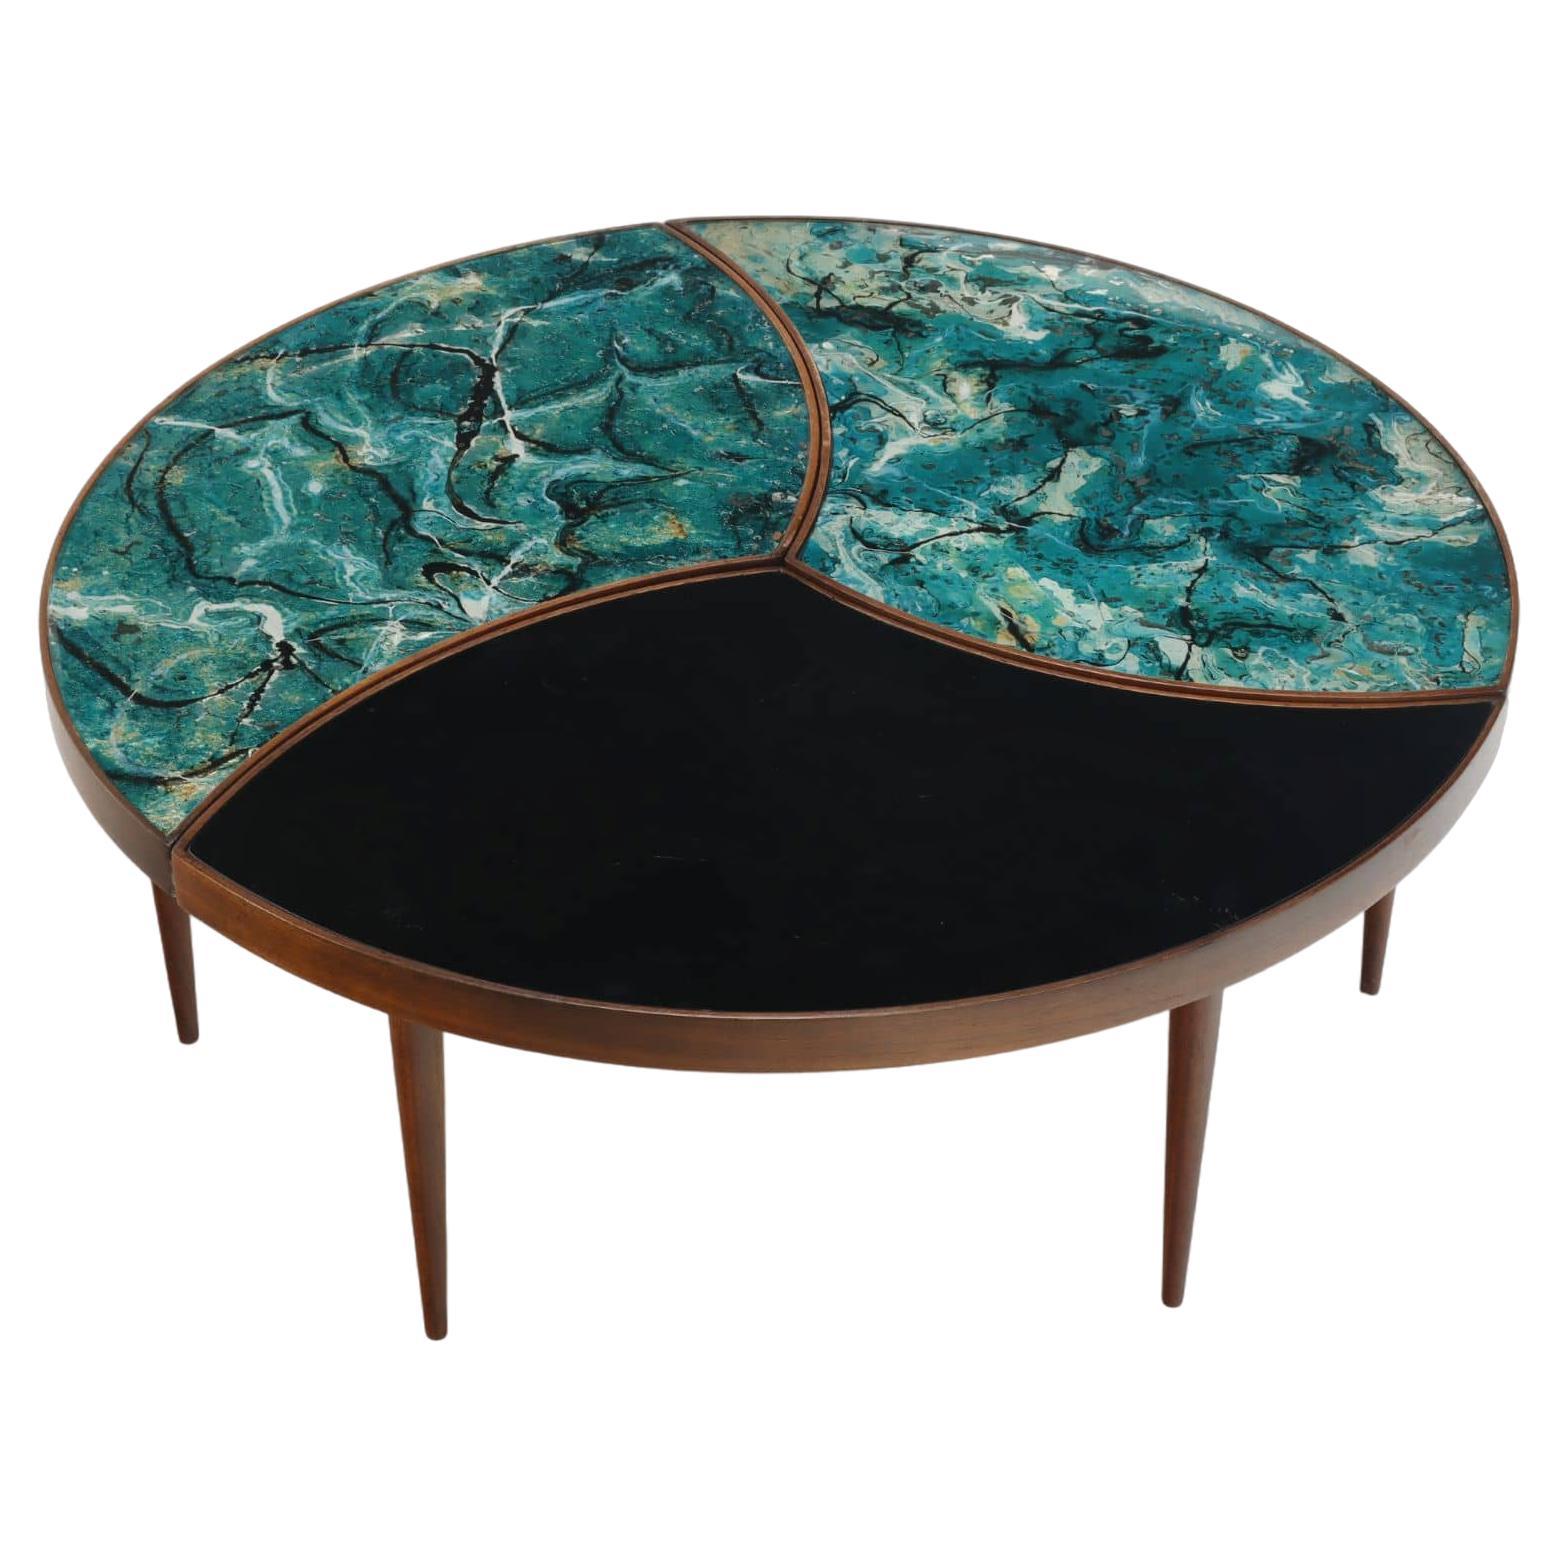 A three-part biomorphic marbleized glass and walnut circular coffee table. For Sale